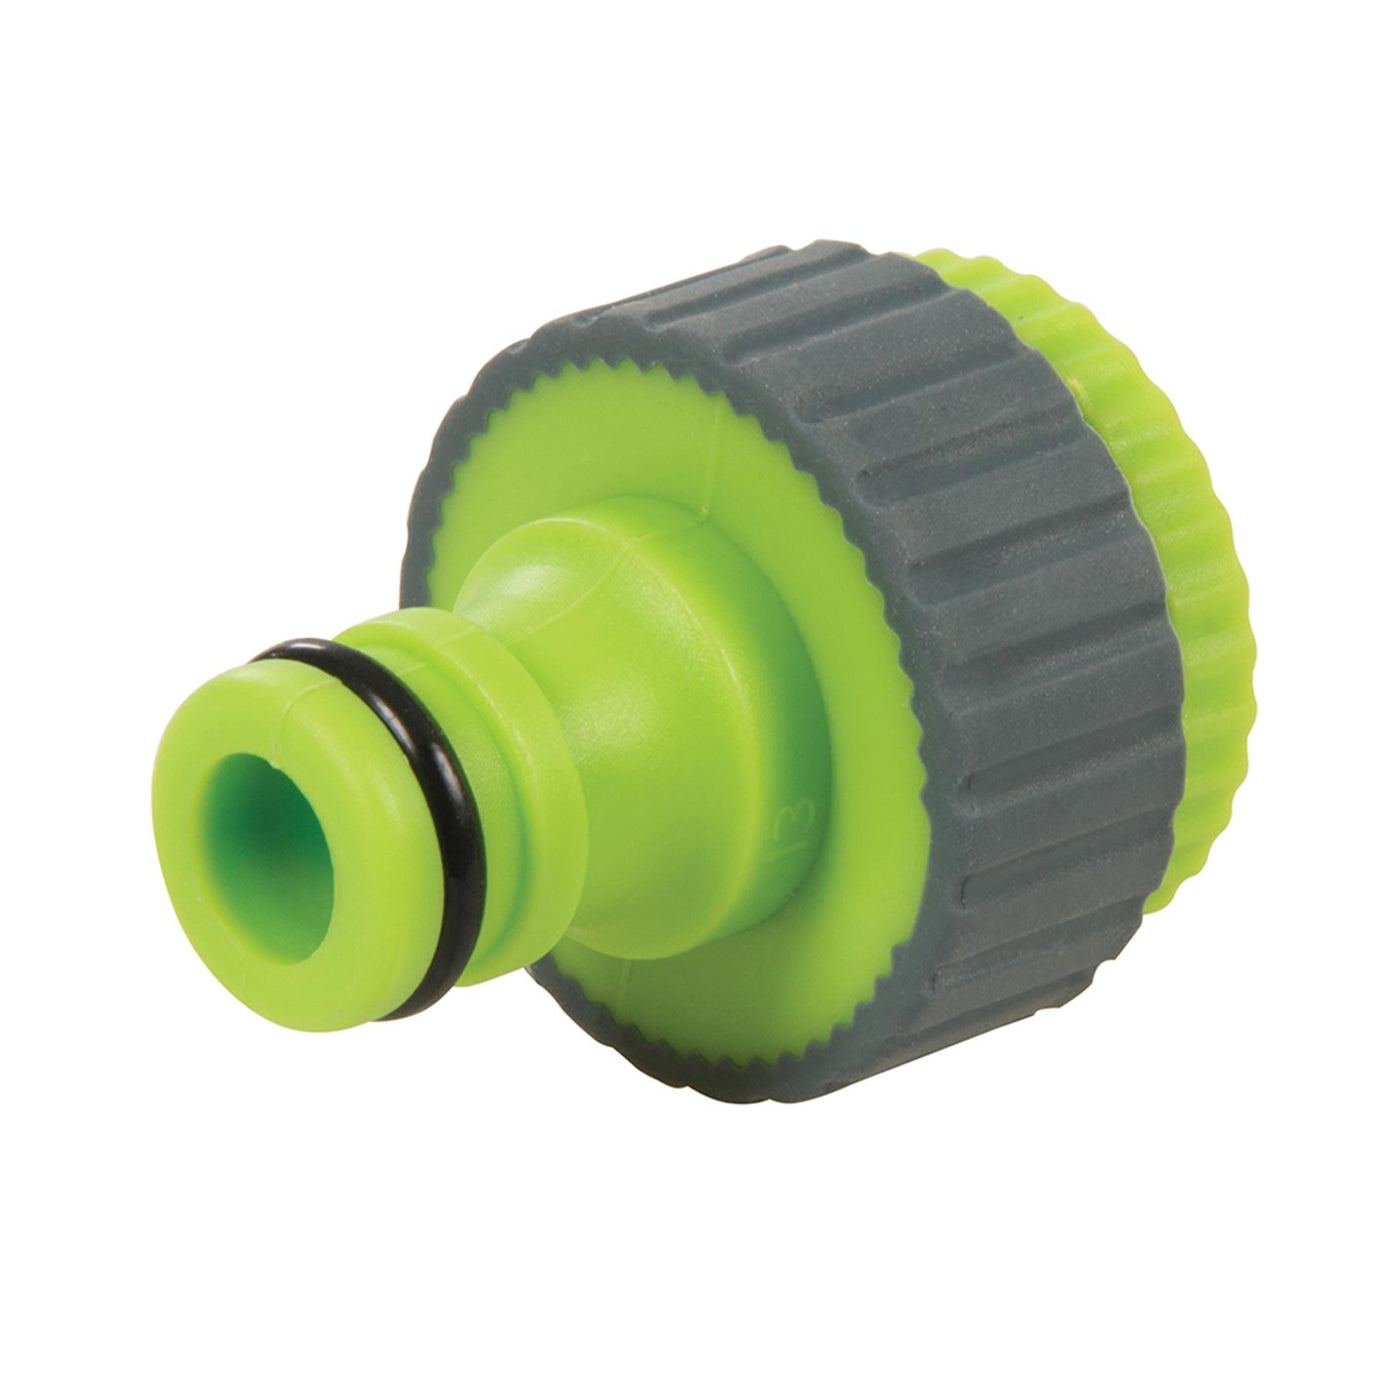 Male Soft-Grip Tap Connector 1/2" - 3/4" Fast And Easy Connecting Of Hoses